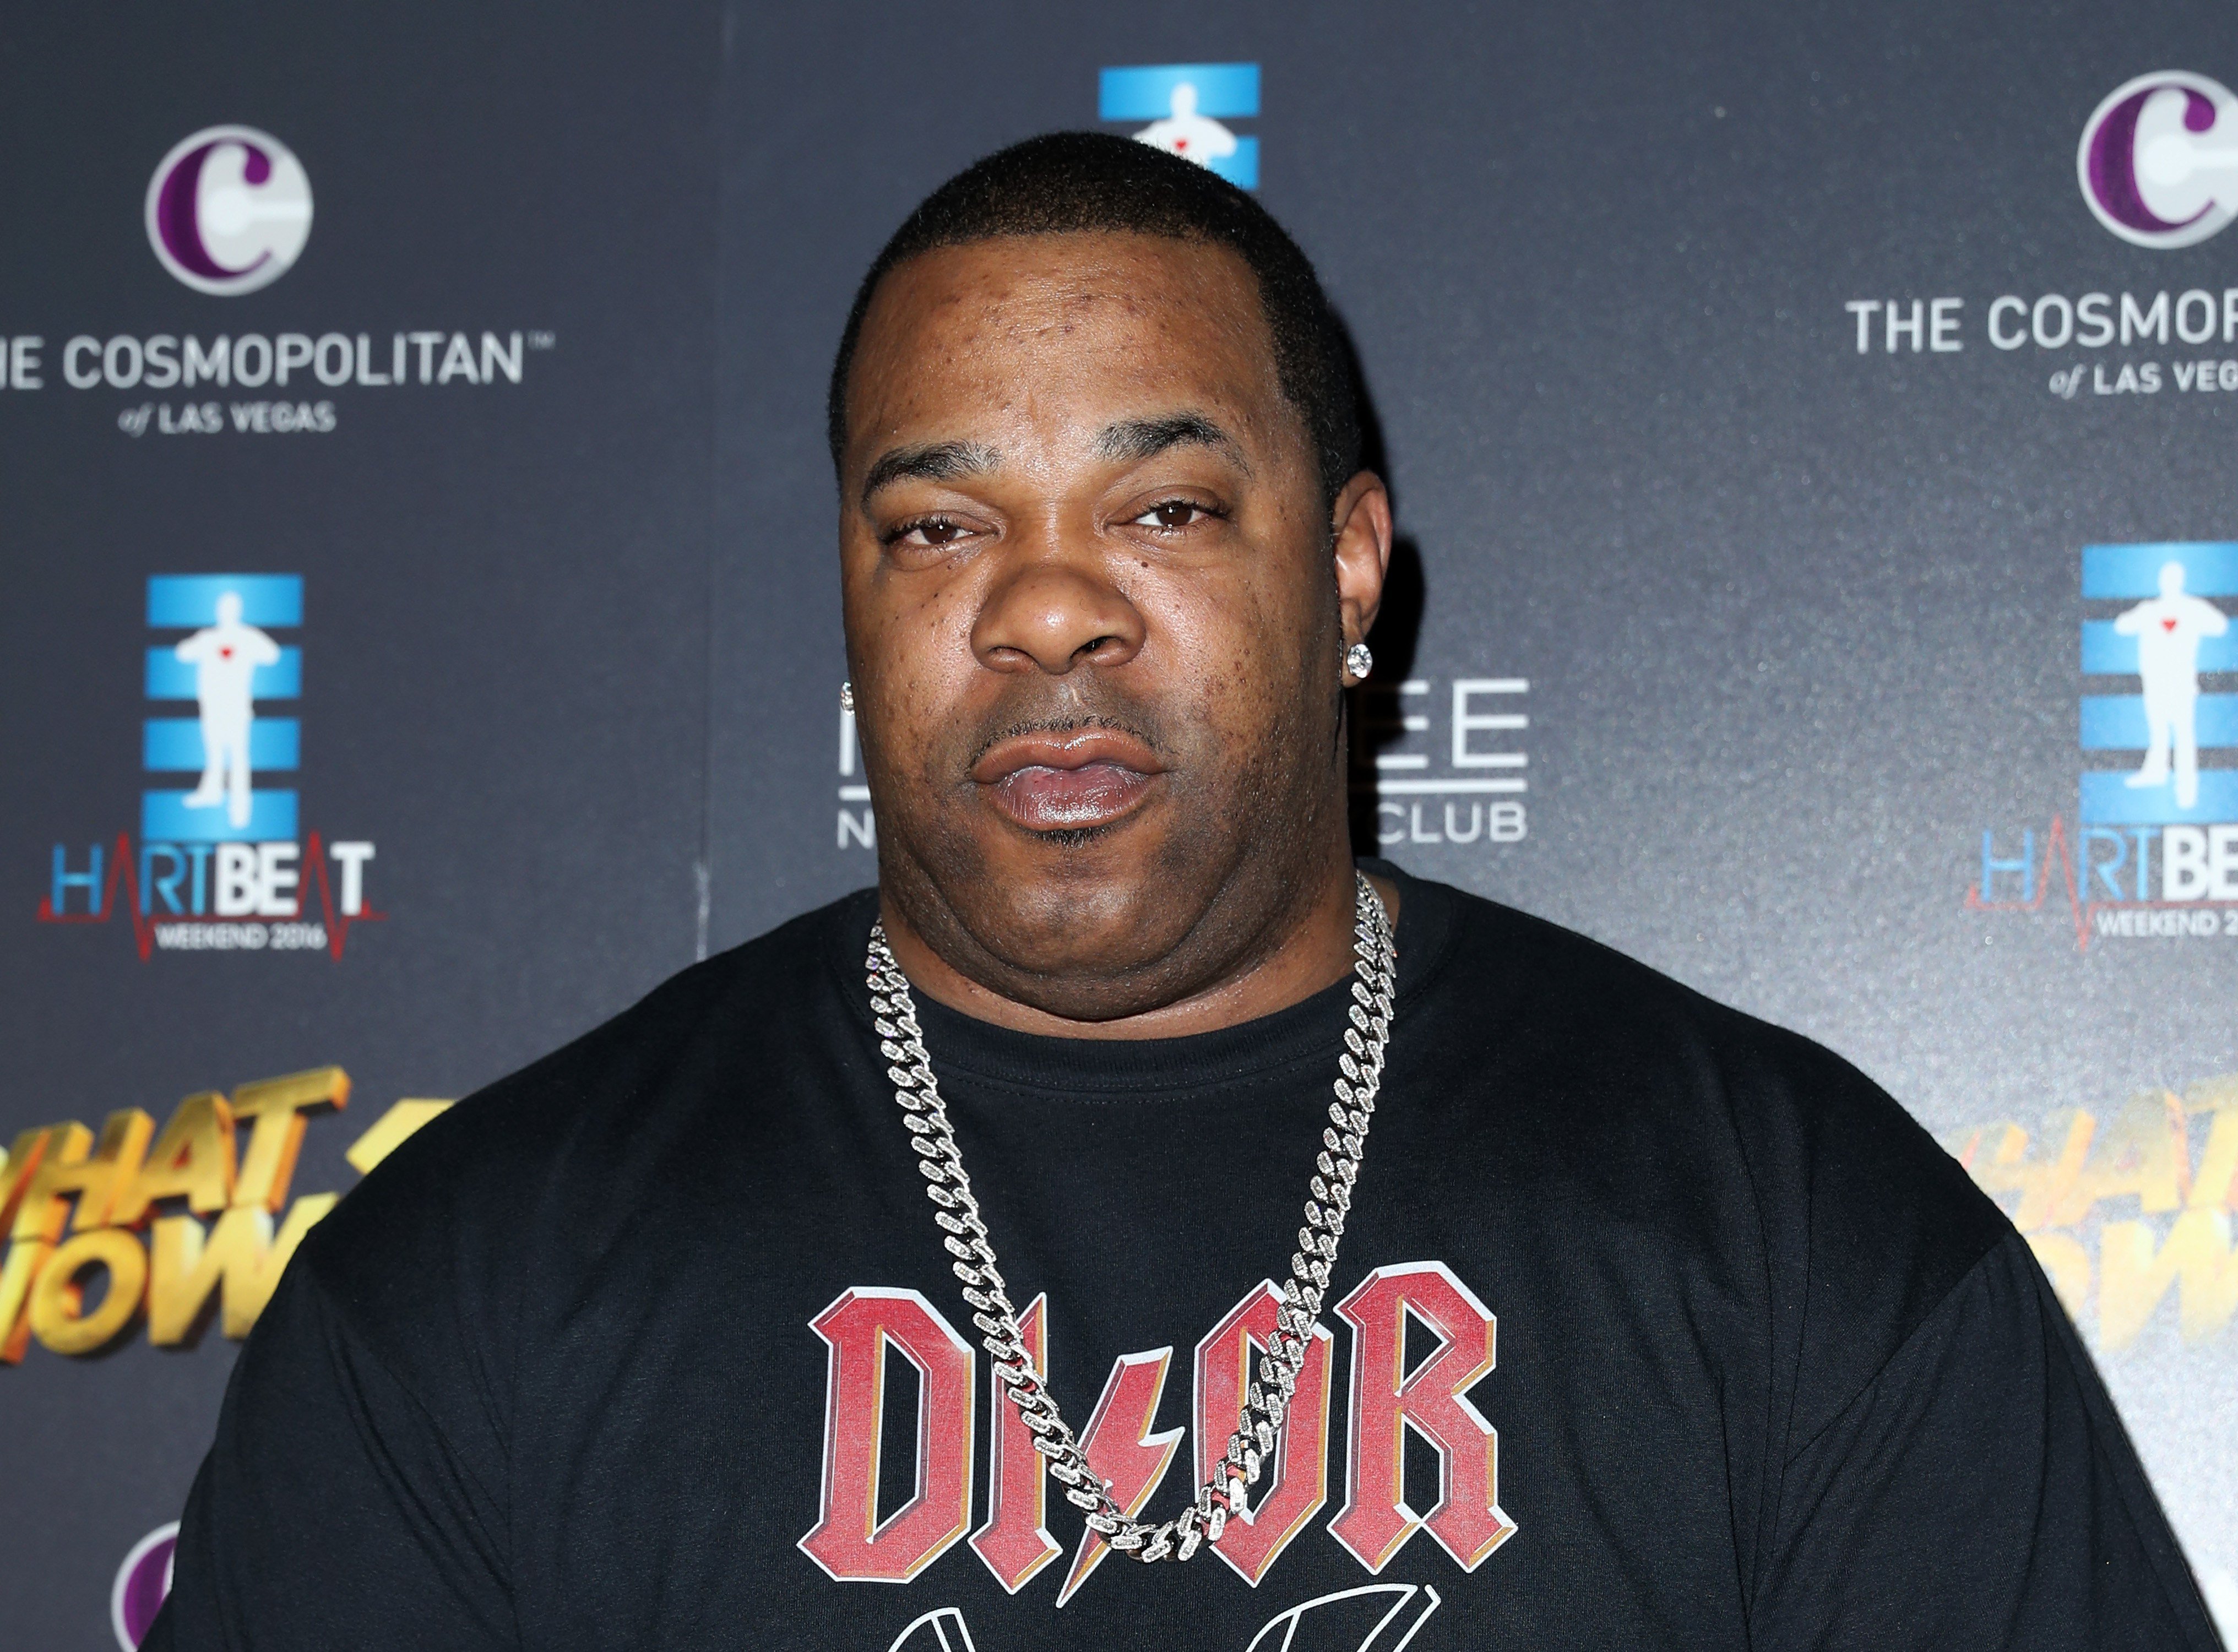 Busta Rhymes Wallpaper Image Photo Picture Background